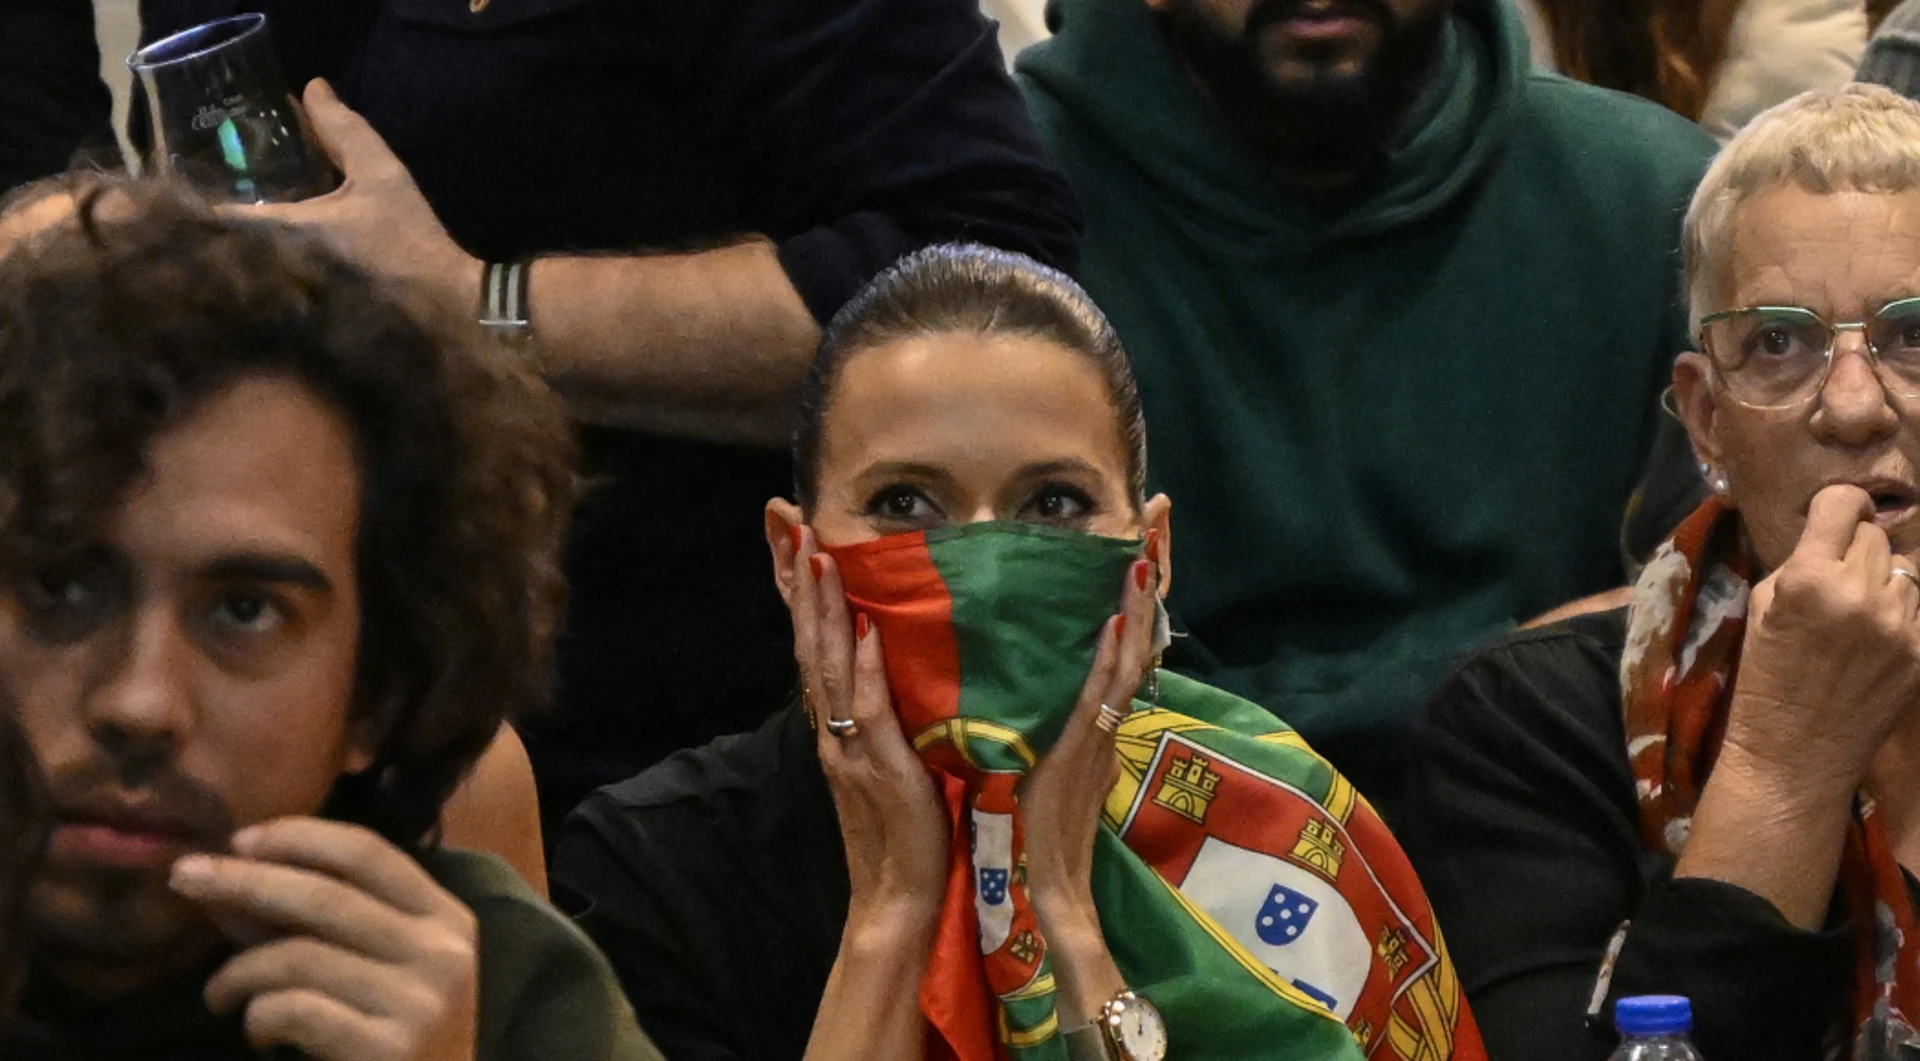 Portugal fans plunge into sadness after World Cup elimination